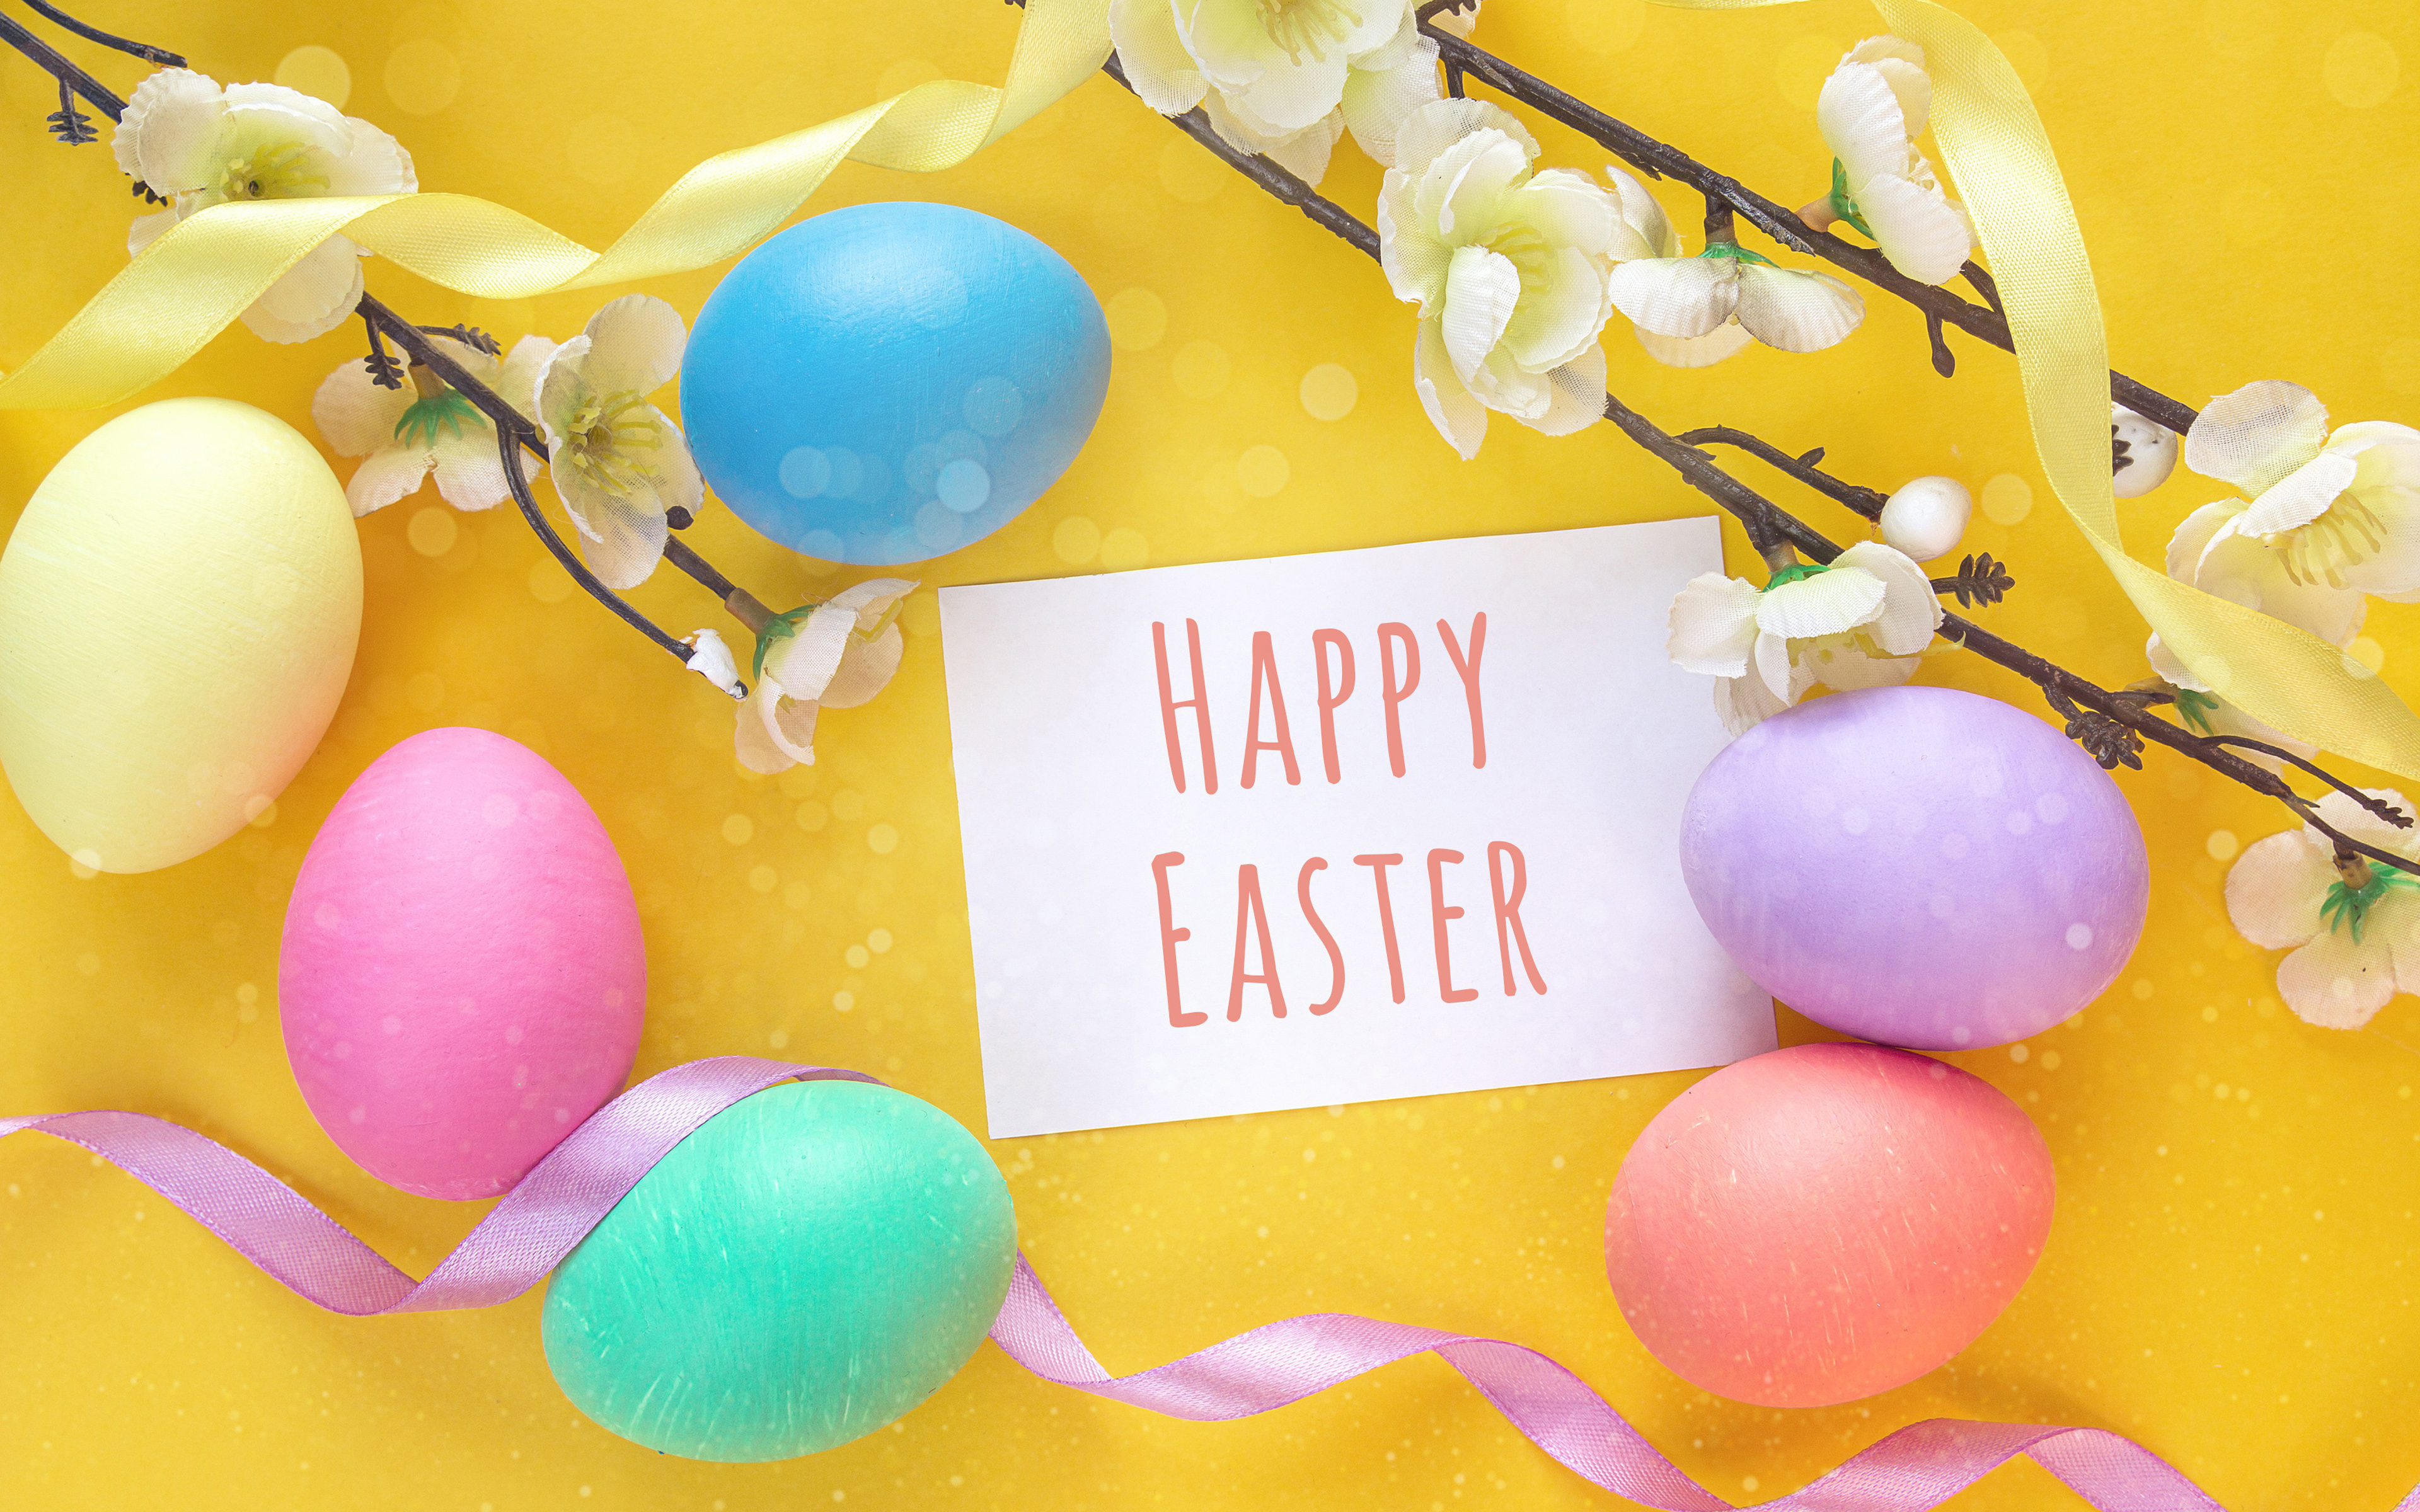 Download wallpaper Happy Easter, 4k, spring, easter eggs, easter decoration, Easter for desktop with resolution 3840x2400. High Quality HD picture wallpaper